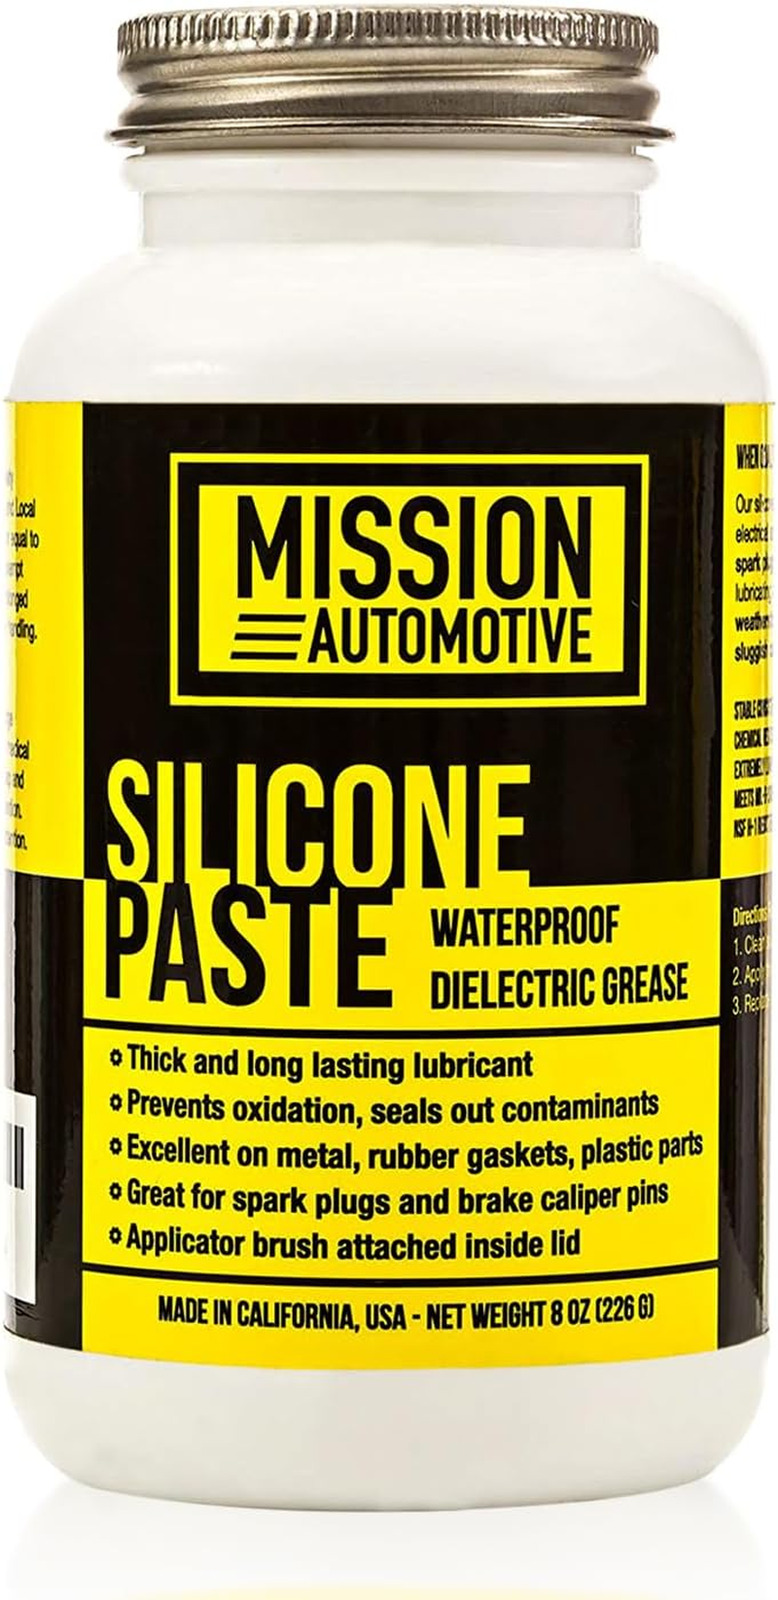 Dielectric Grease Silicone Paste Waterproof Marine 8 Oz-US